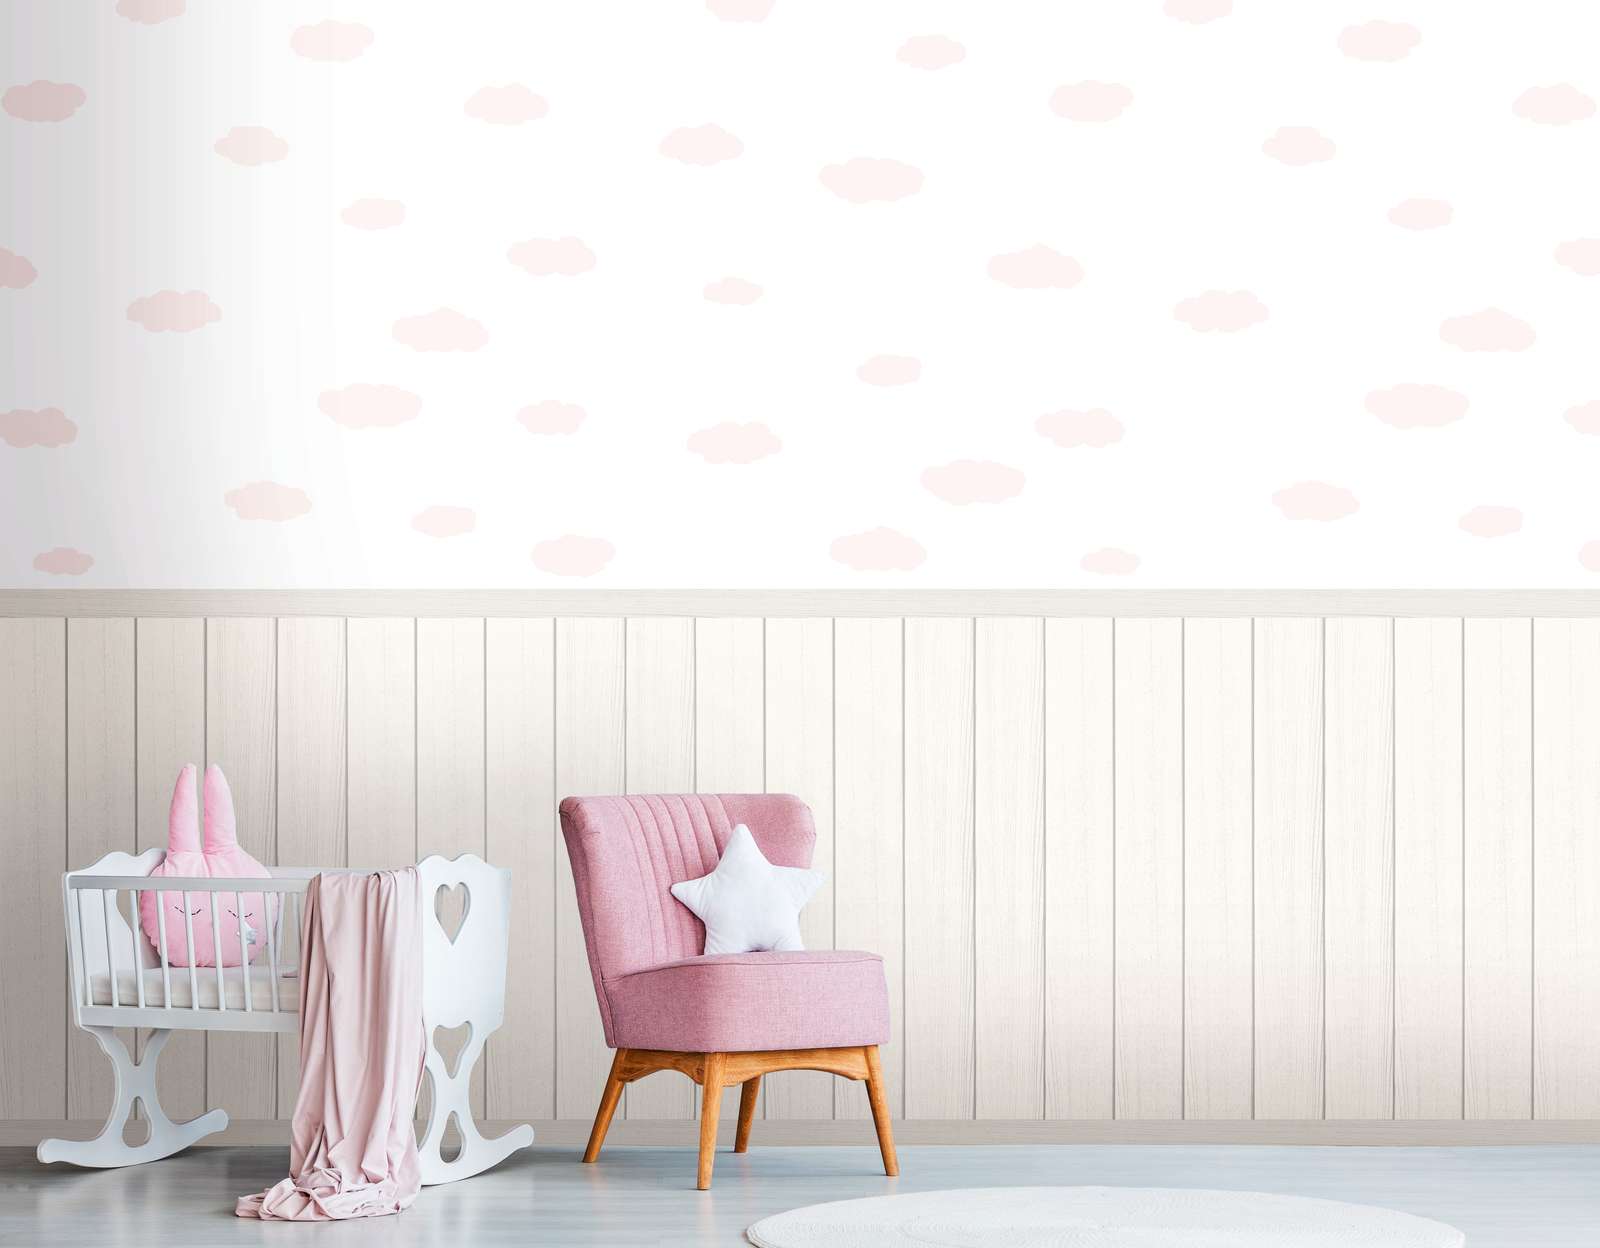             Non-woven motif wallpaper with wood-effect plinth border and cloud pattern - white, pink, grey
        